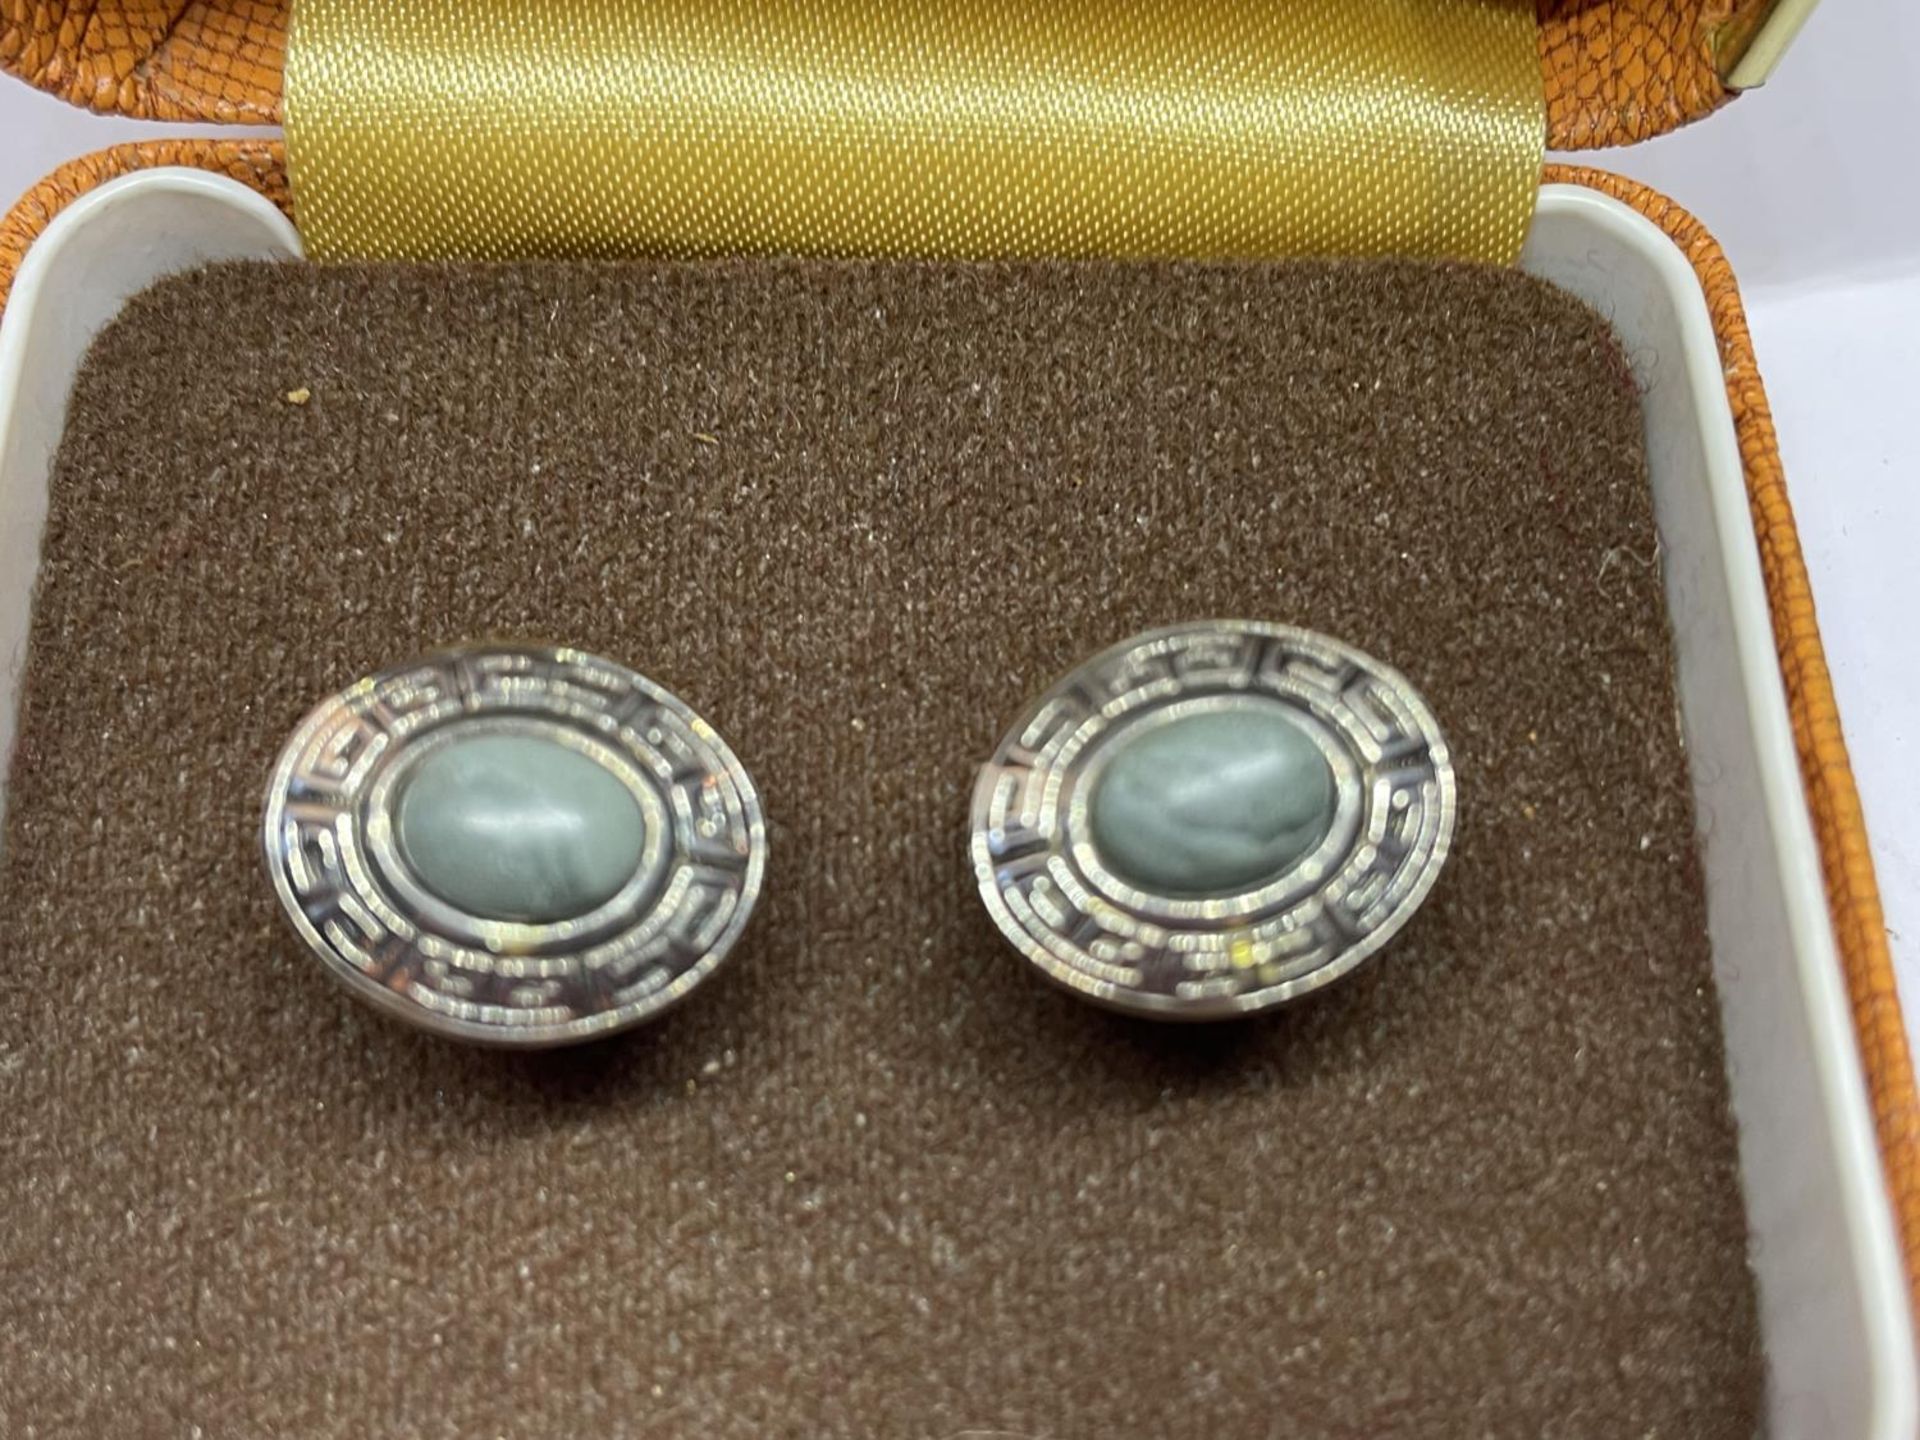 TWO PAIRS OF SILVER CUFFLINKS IN A PRESENTATION BOX - Image 2 of 3